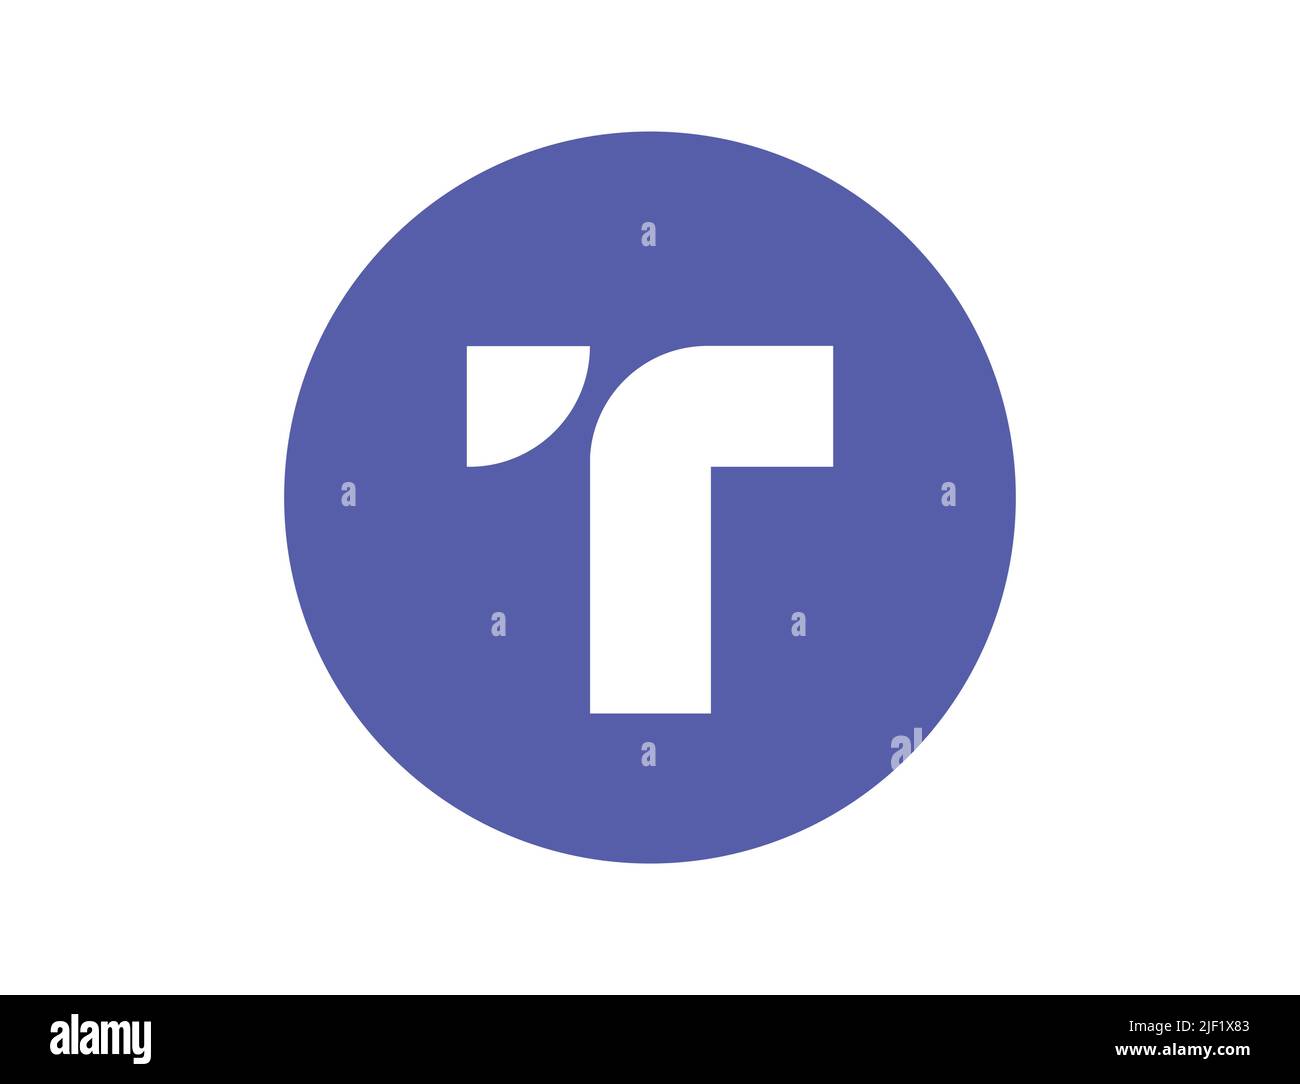 TUSD currency Icon. Flat design. Concept of crypto currency and blockchain. Stock Vector